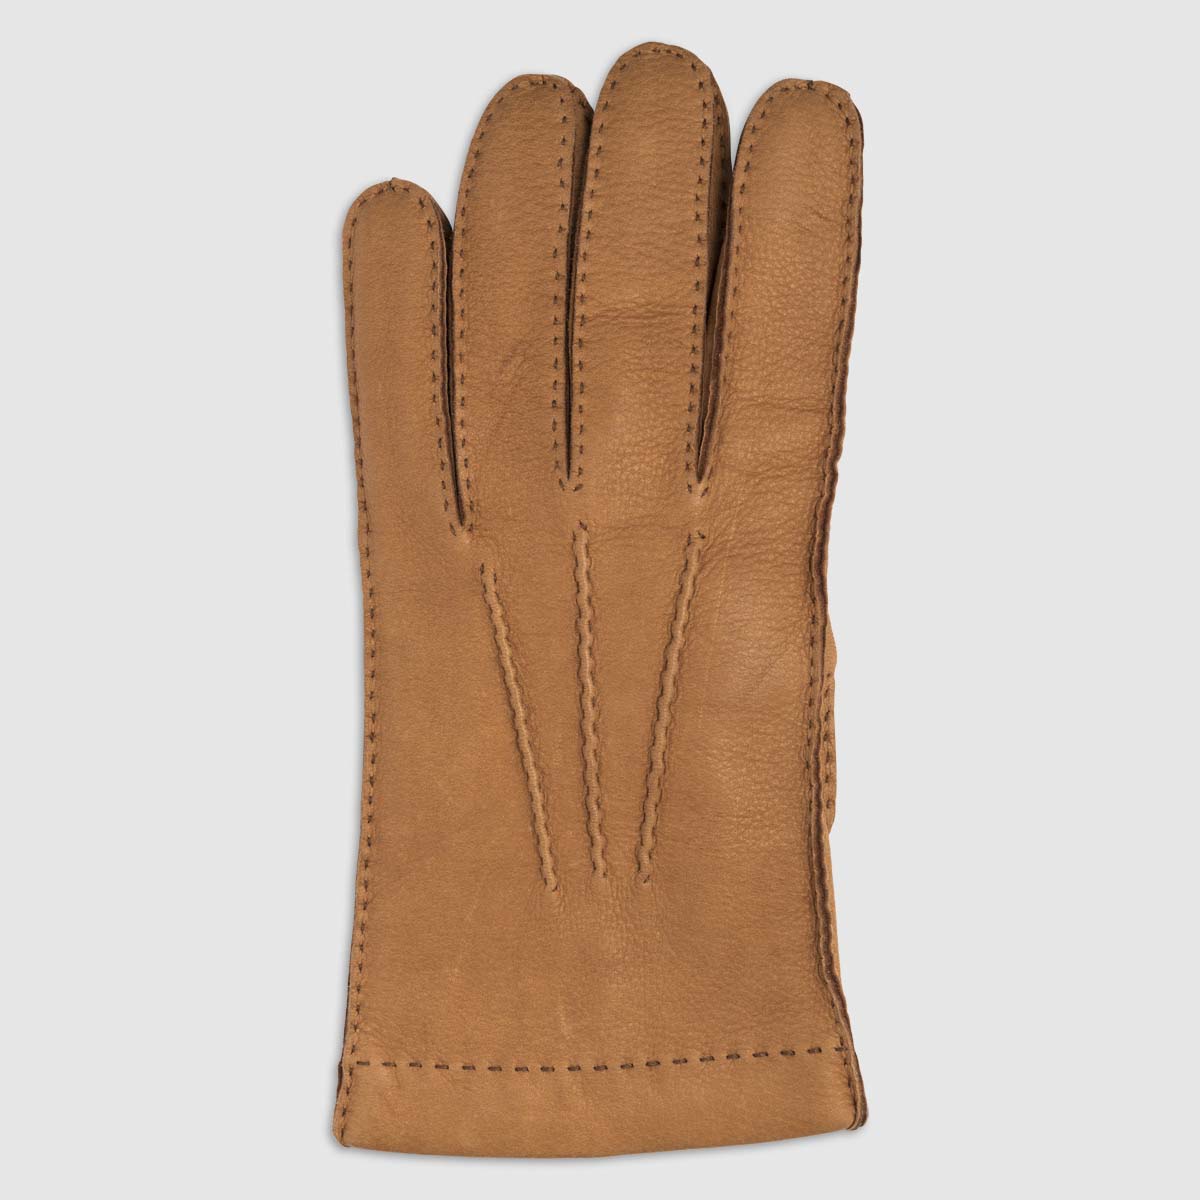 Hand Stitched Deer Leather Glove with Cashmere Lining – 8.5